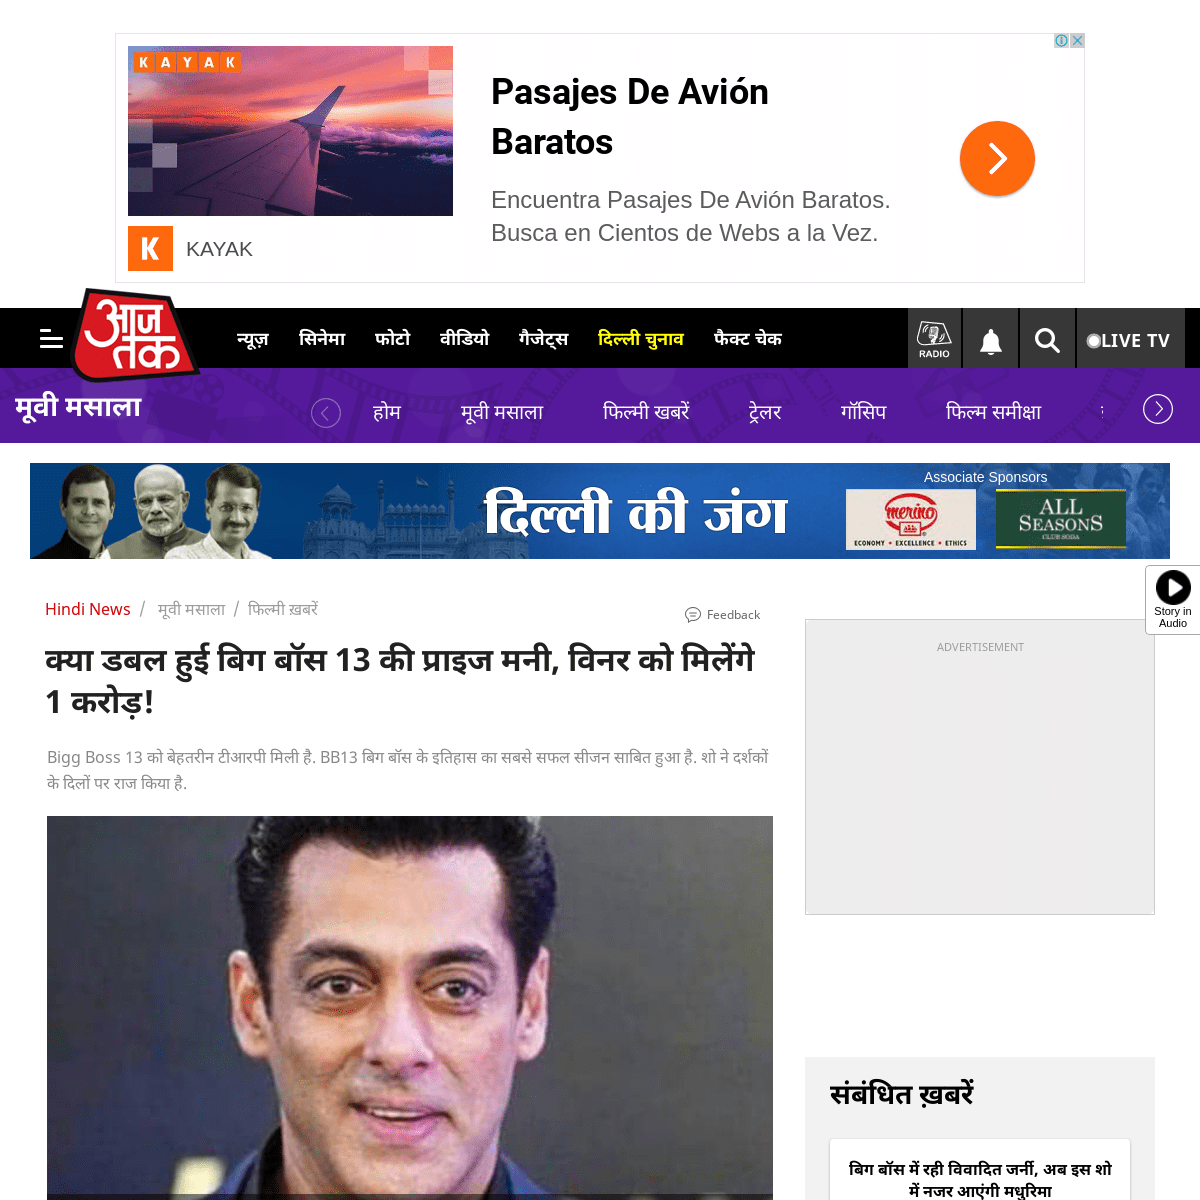 A complete backup of aajtak.intoday.in/story/bigg-boss-13-prize-money-has-doubled-winner-will-get-1-crore-rupee-salman-khan-tmov